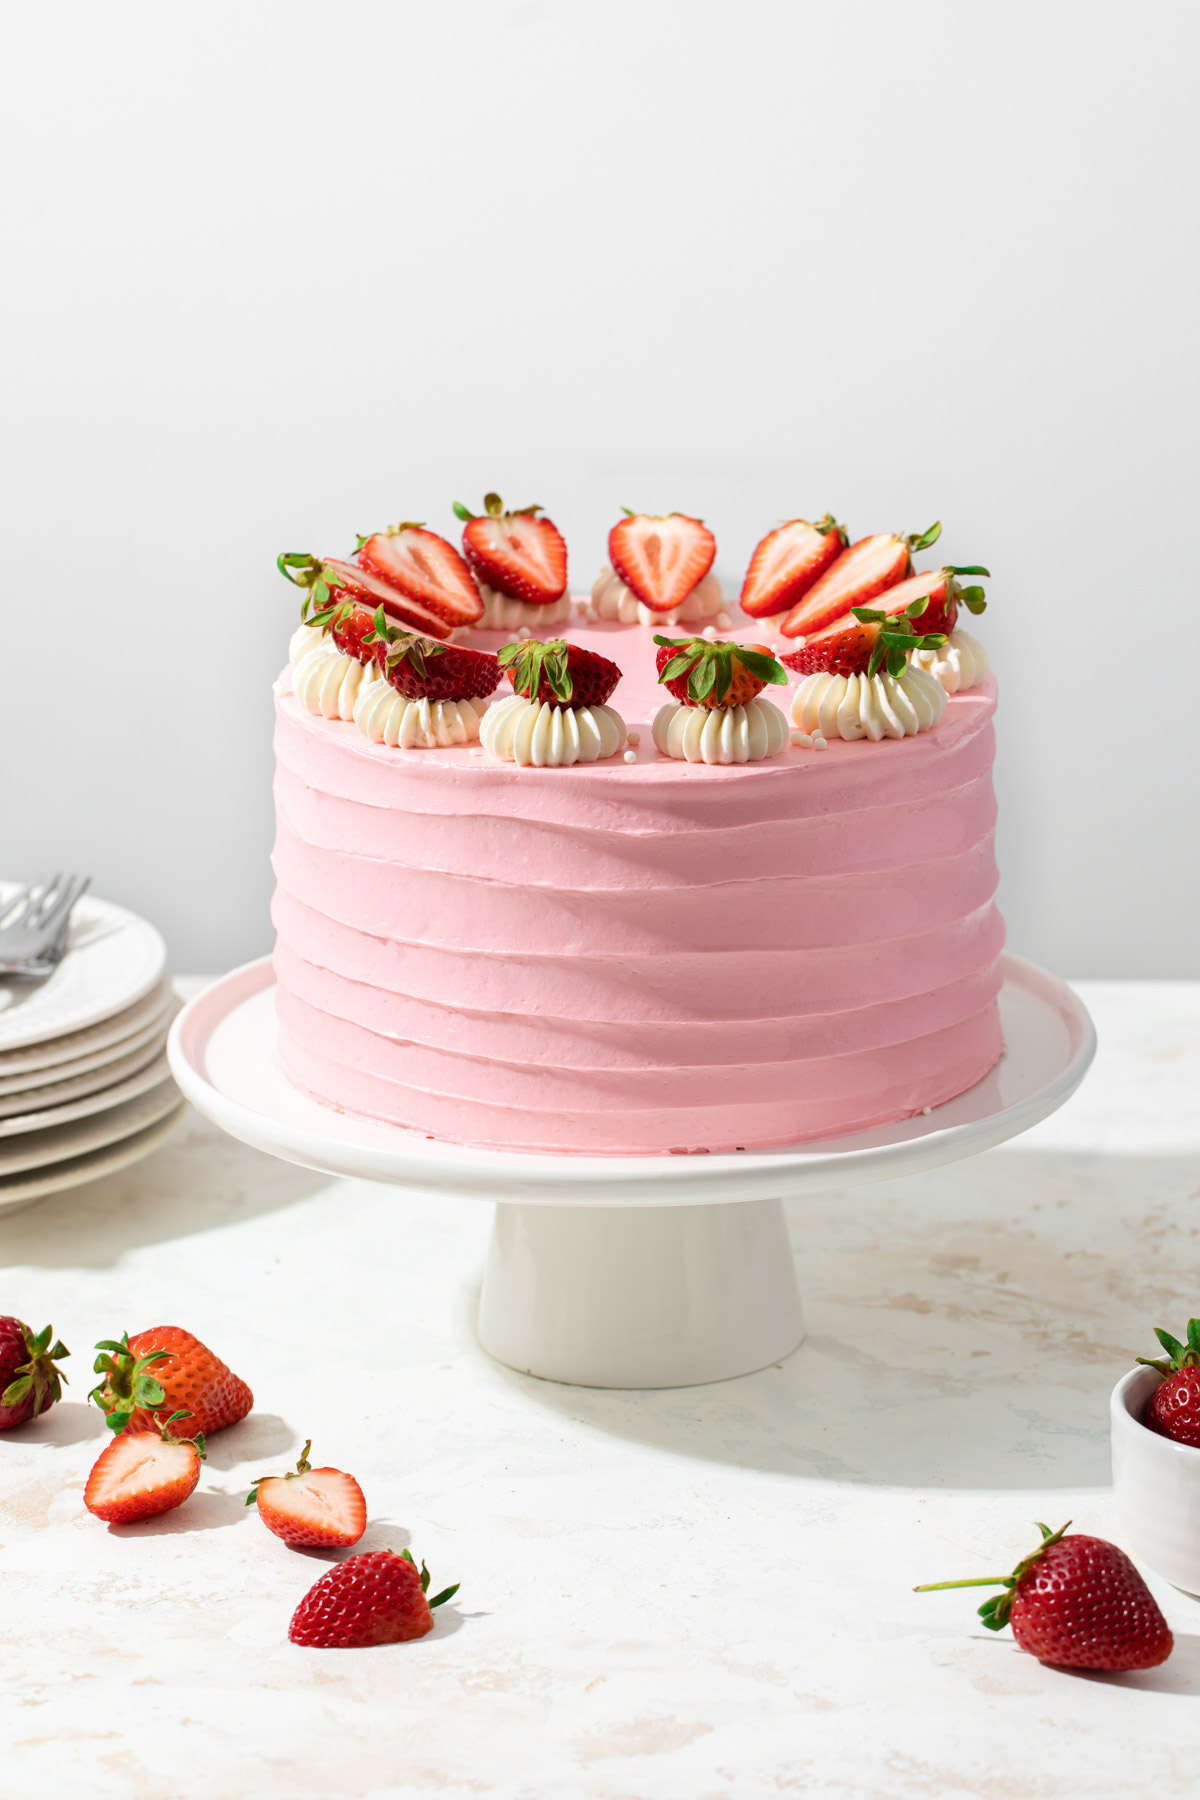 A pink strawberry layer cake on a cake pedestal with fresh strawberries on top